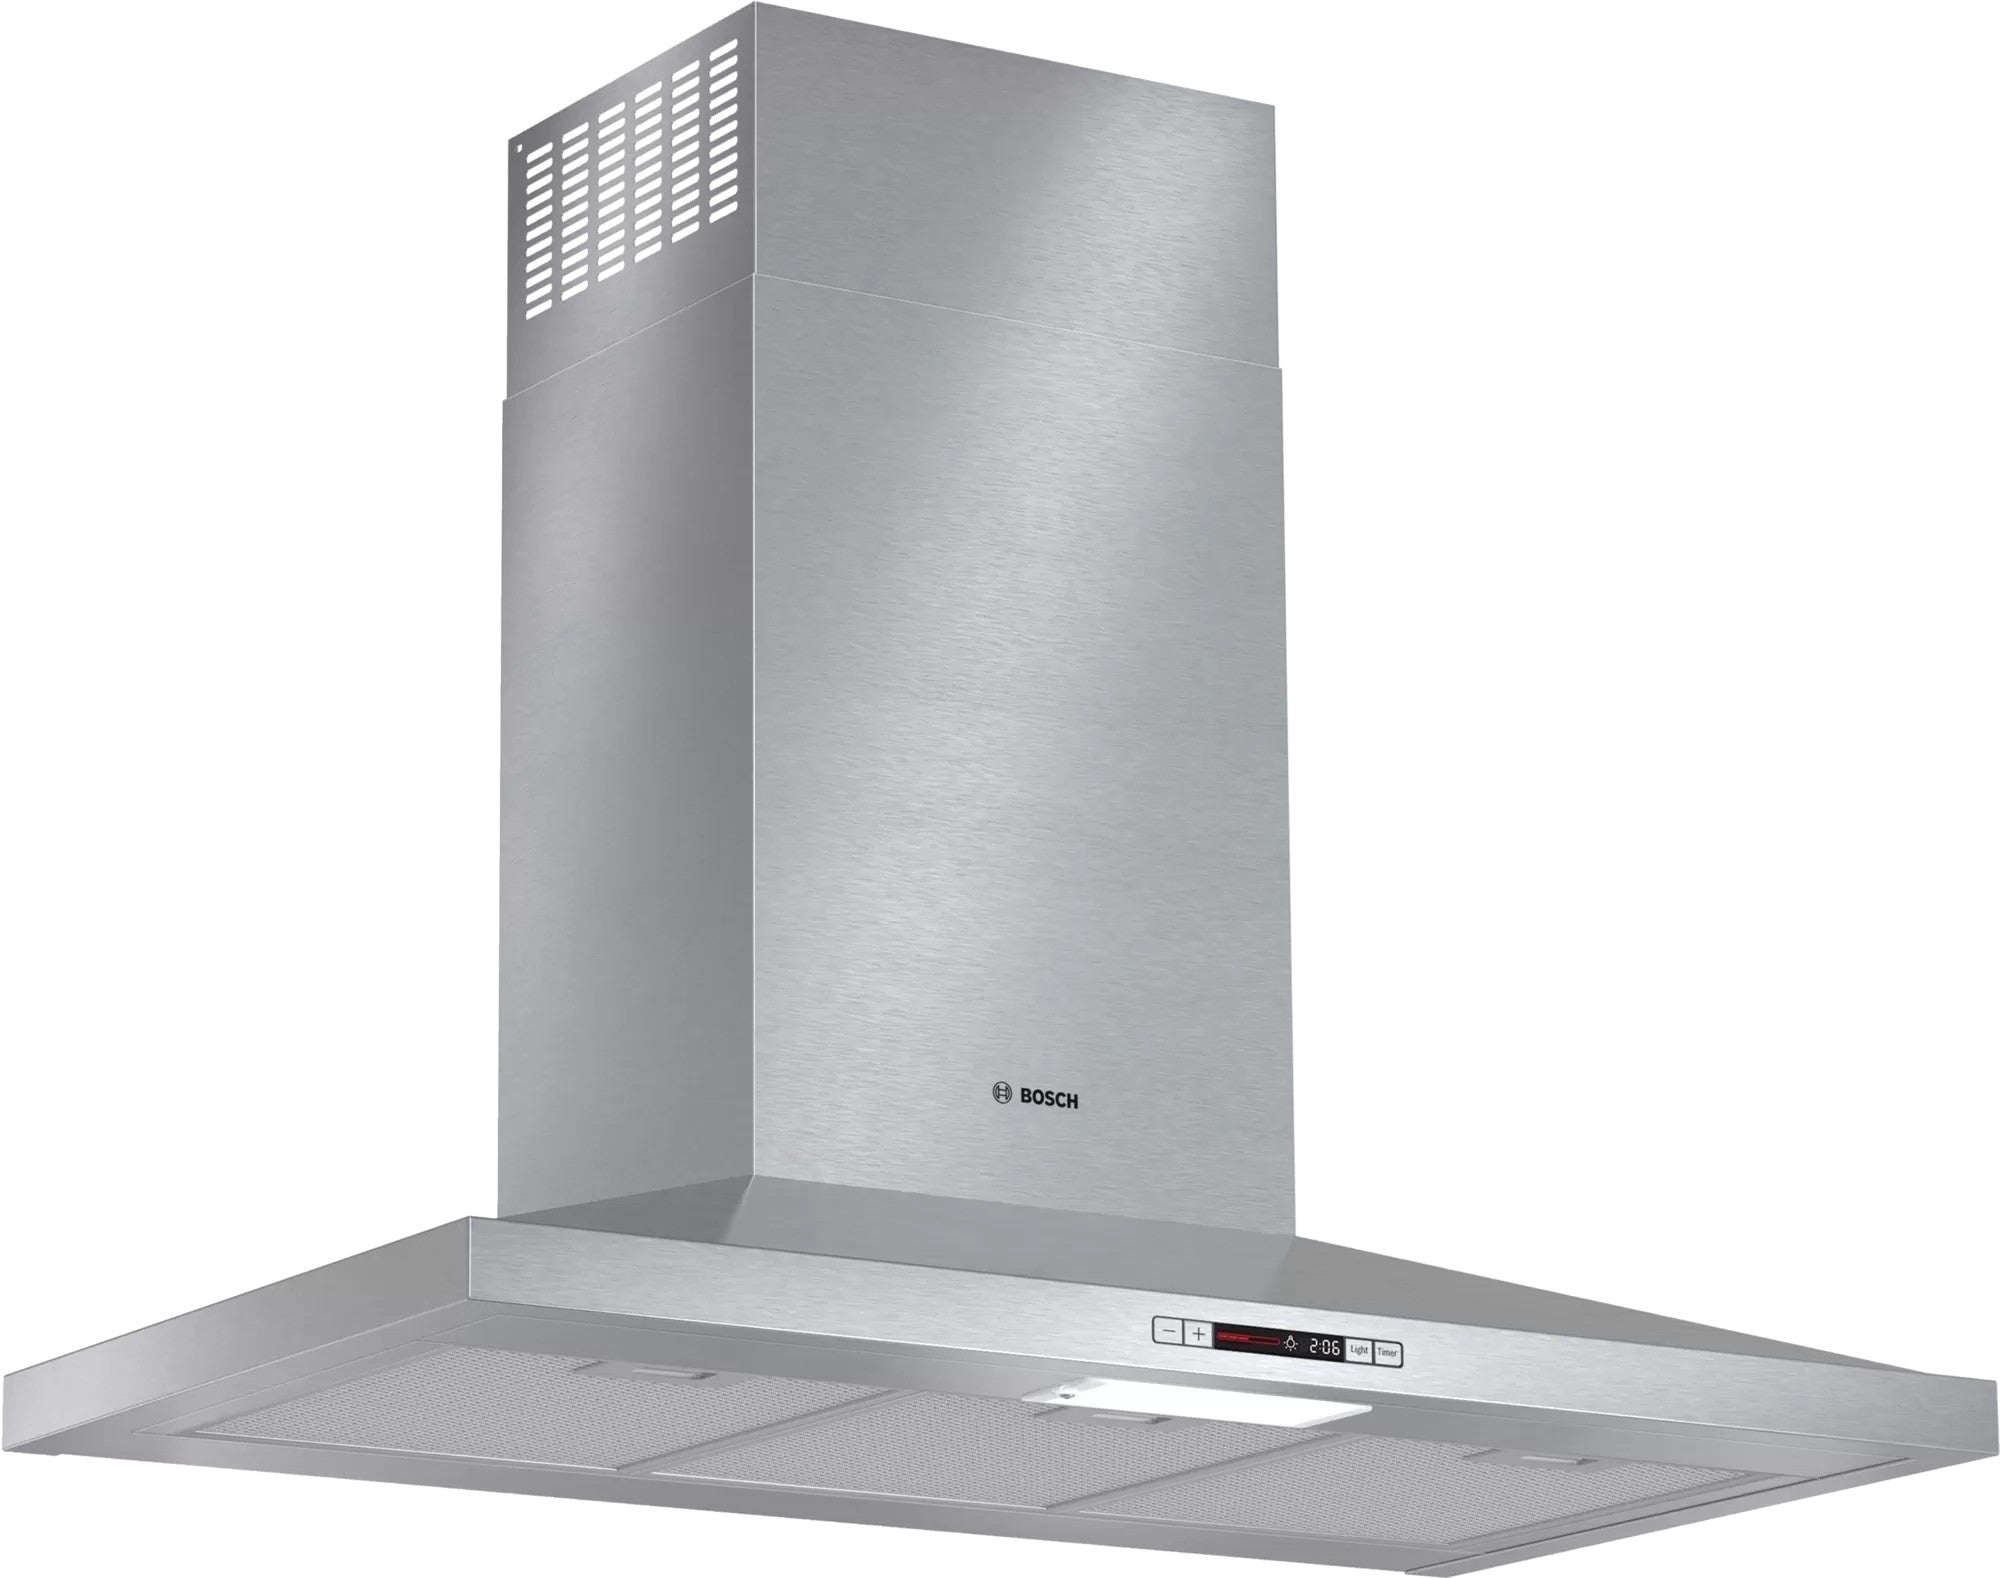 Bosch - 42.6 Inch  CFM Wall Mount and Chimney Range Vent in Stainless - HCP36E51UC